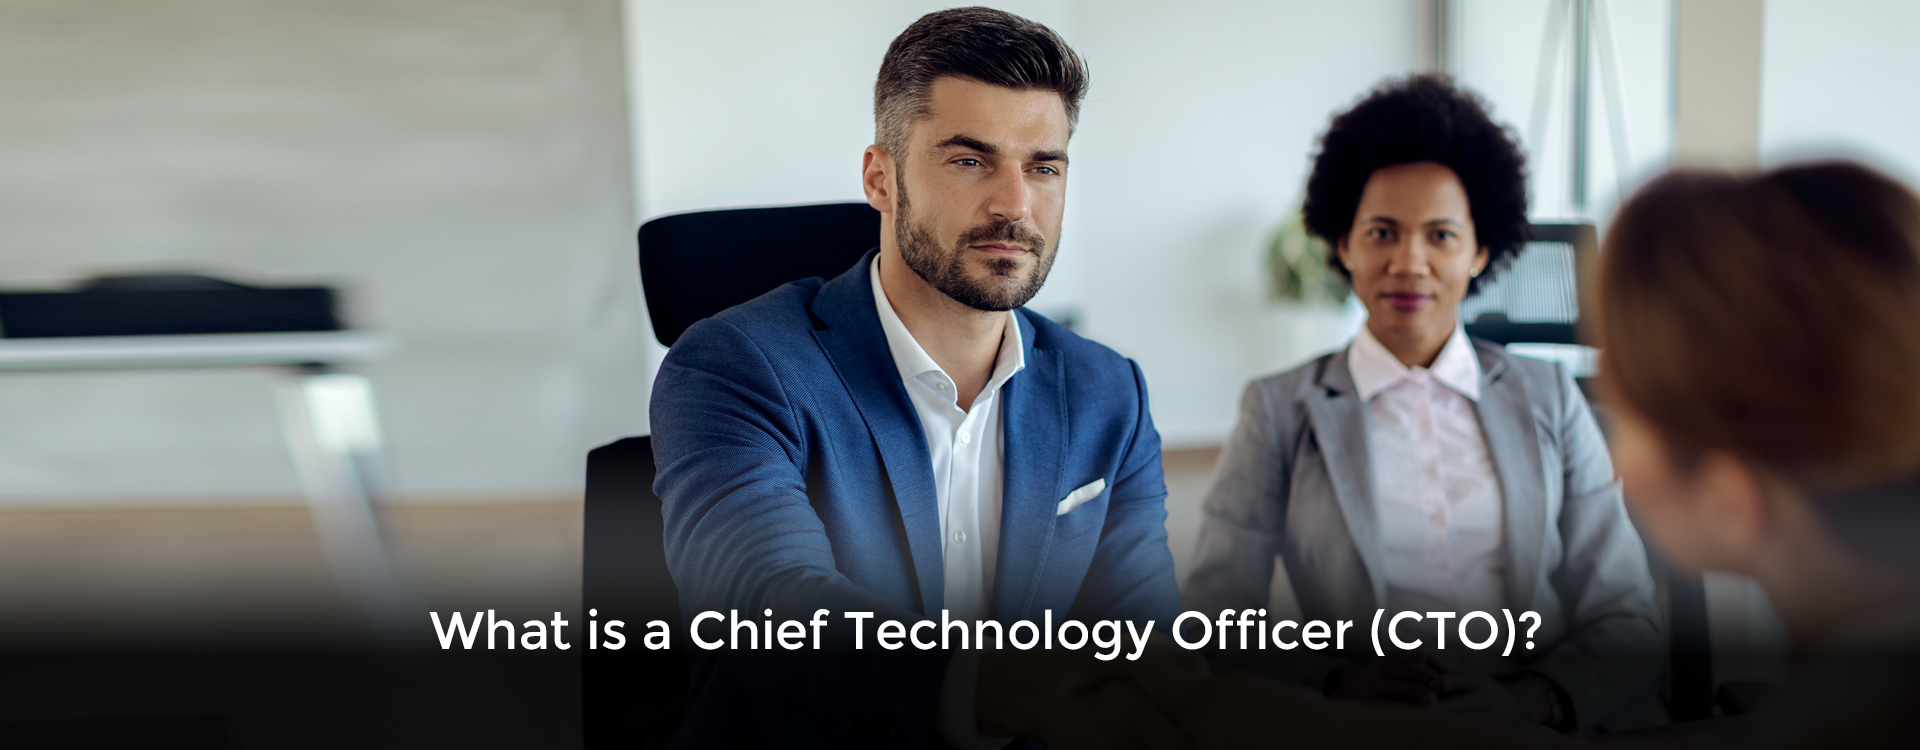 What is a Chief Technology Officer (CTO)?